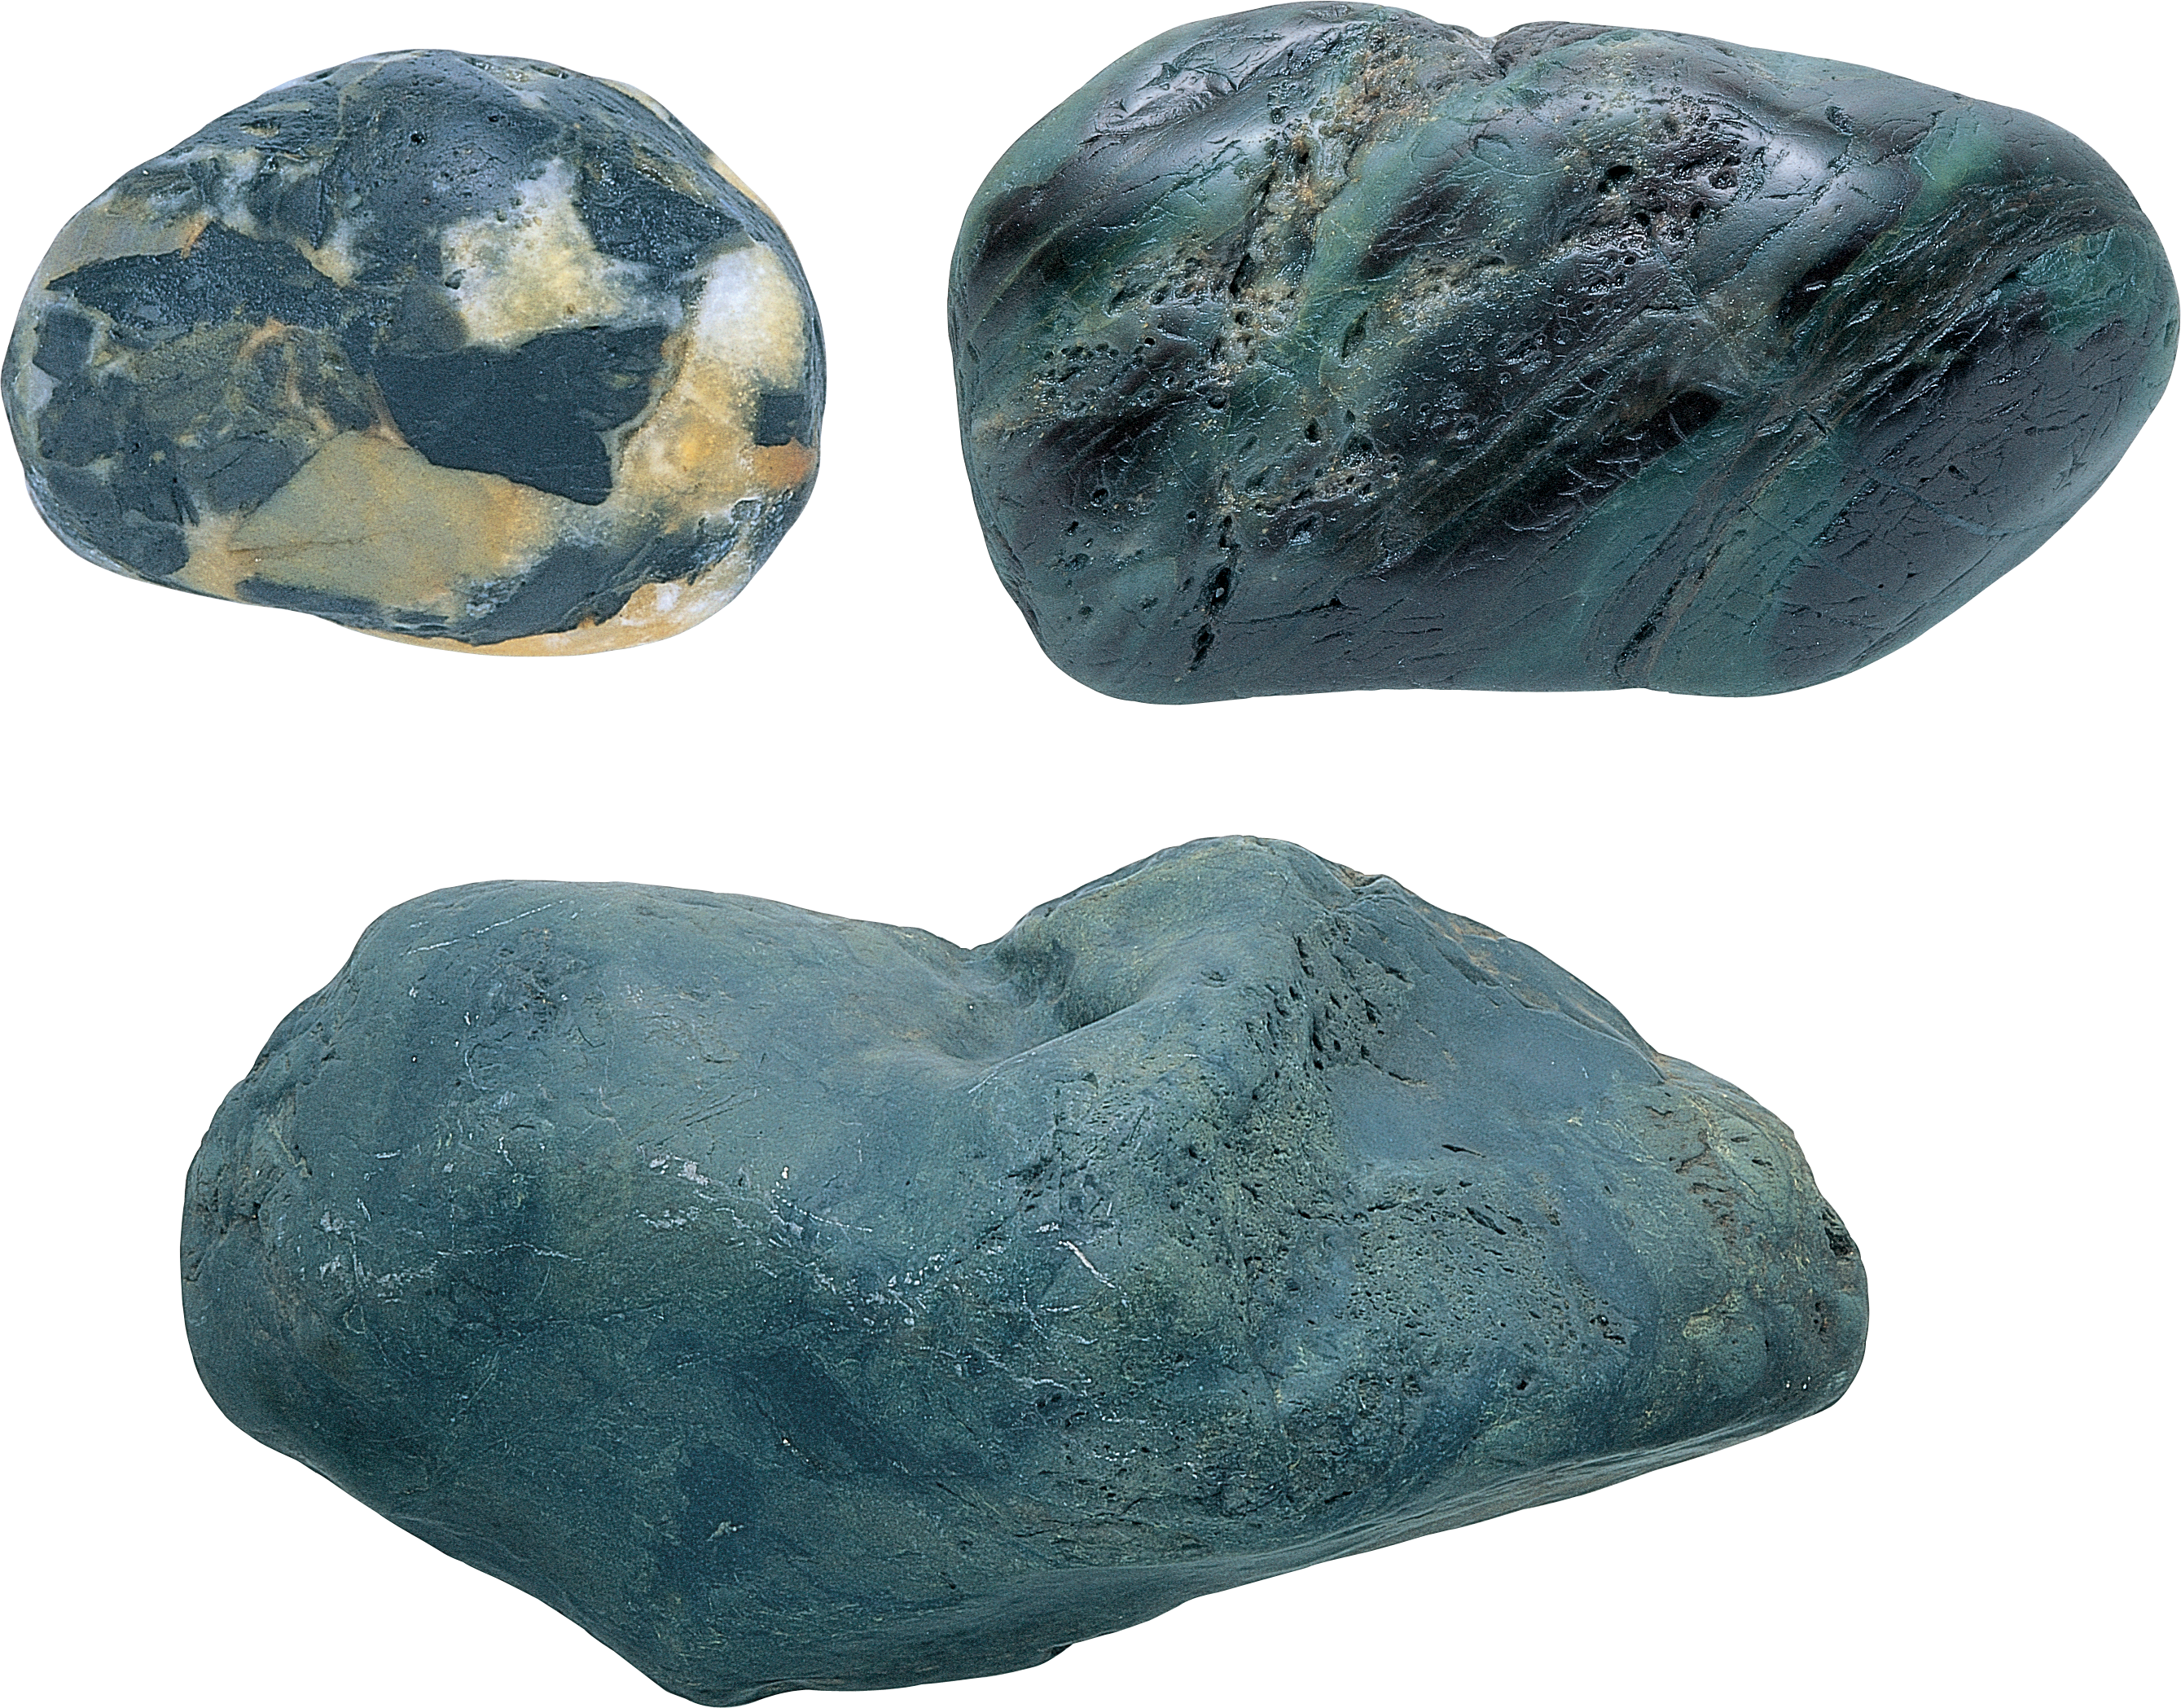 Stones And Rocks PNG Image